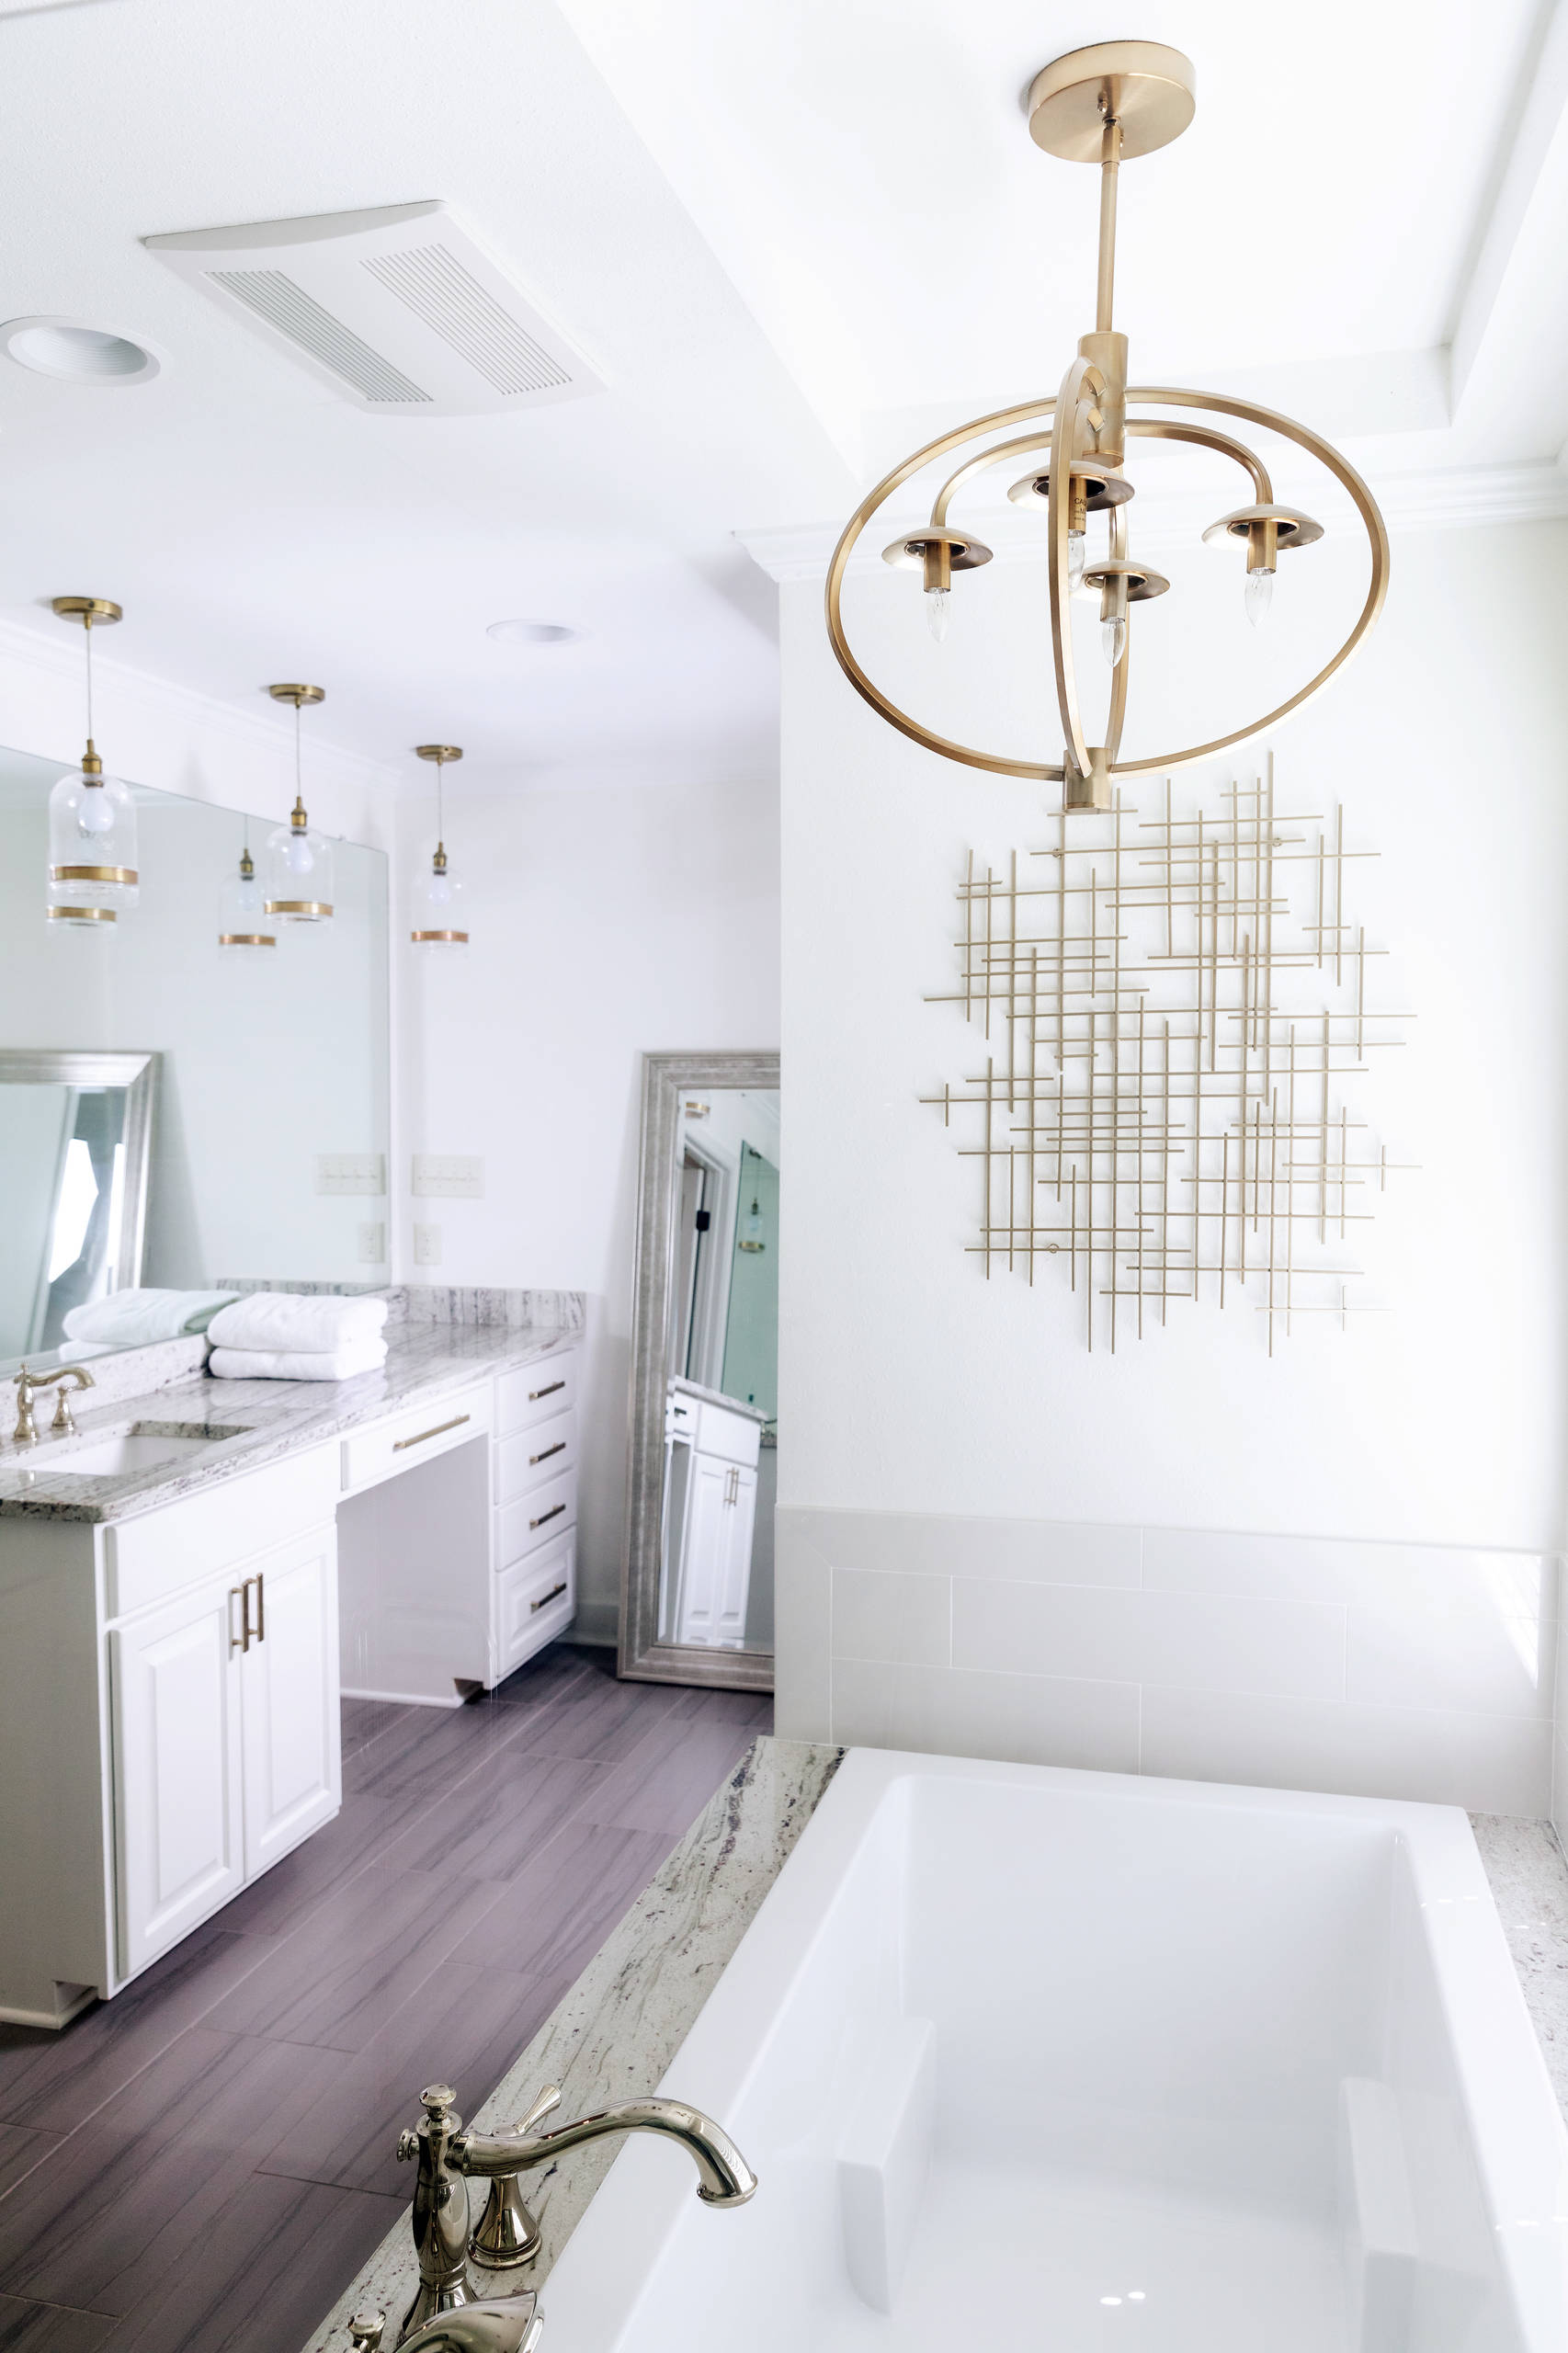 Vanity with white cabinets and honey bronze hardware. Frameless mirror above vanity. Glass pendant light with antique copper accents. Satin brass pendant light over tub. Framed mirror leaned up agains